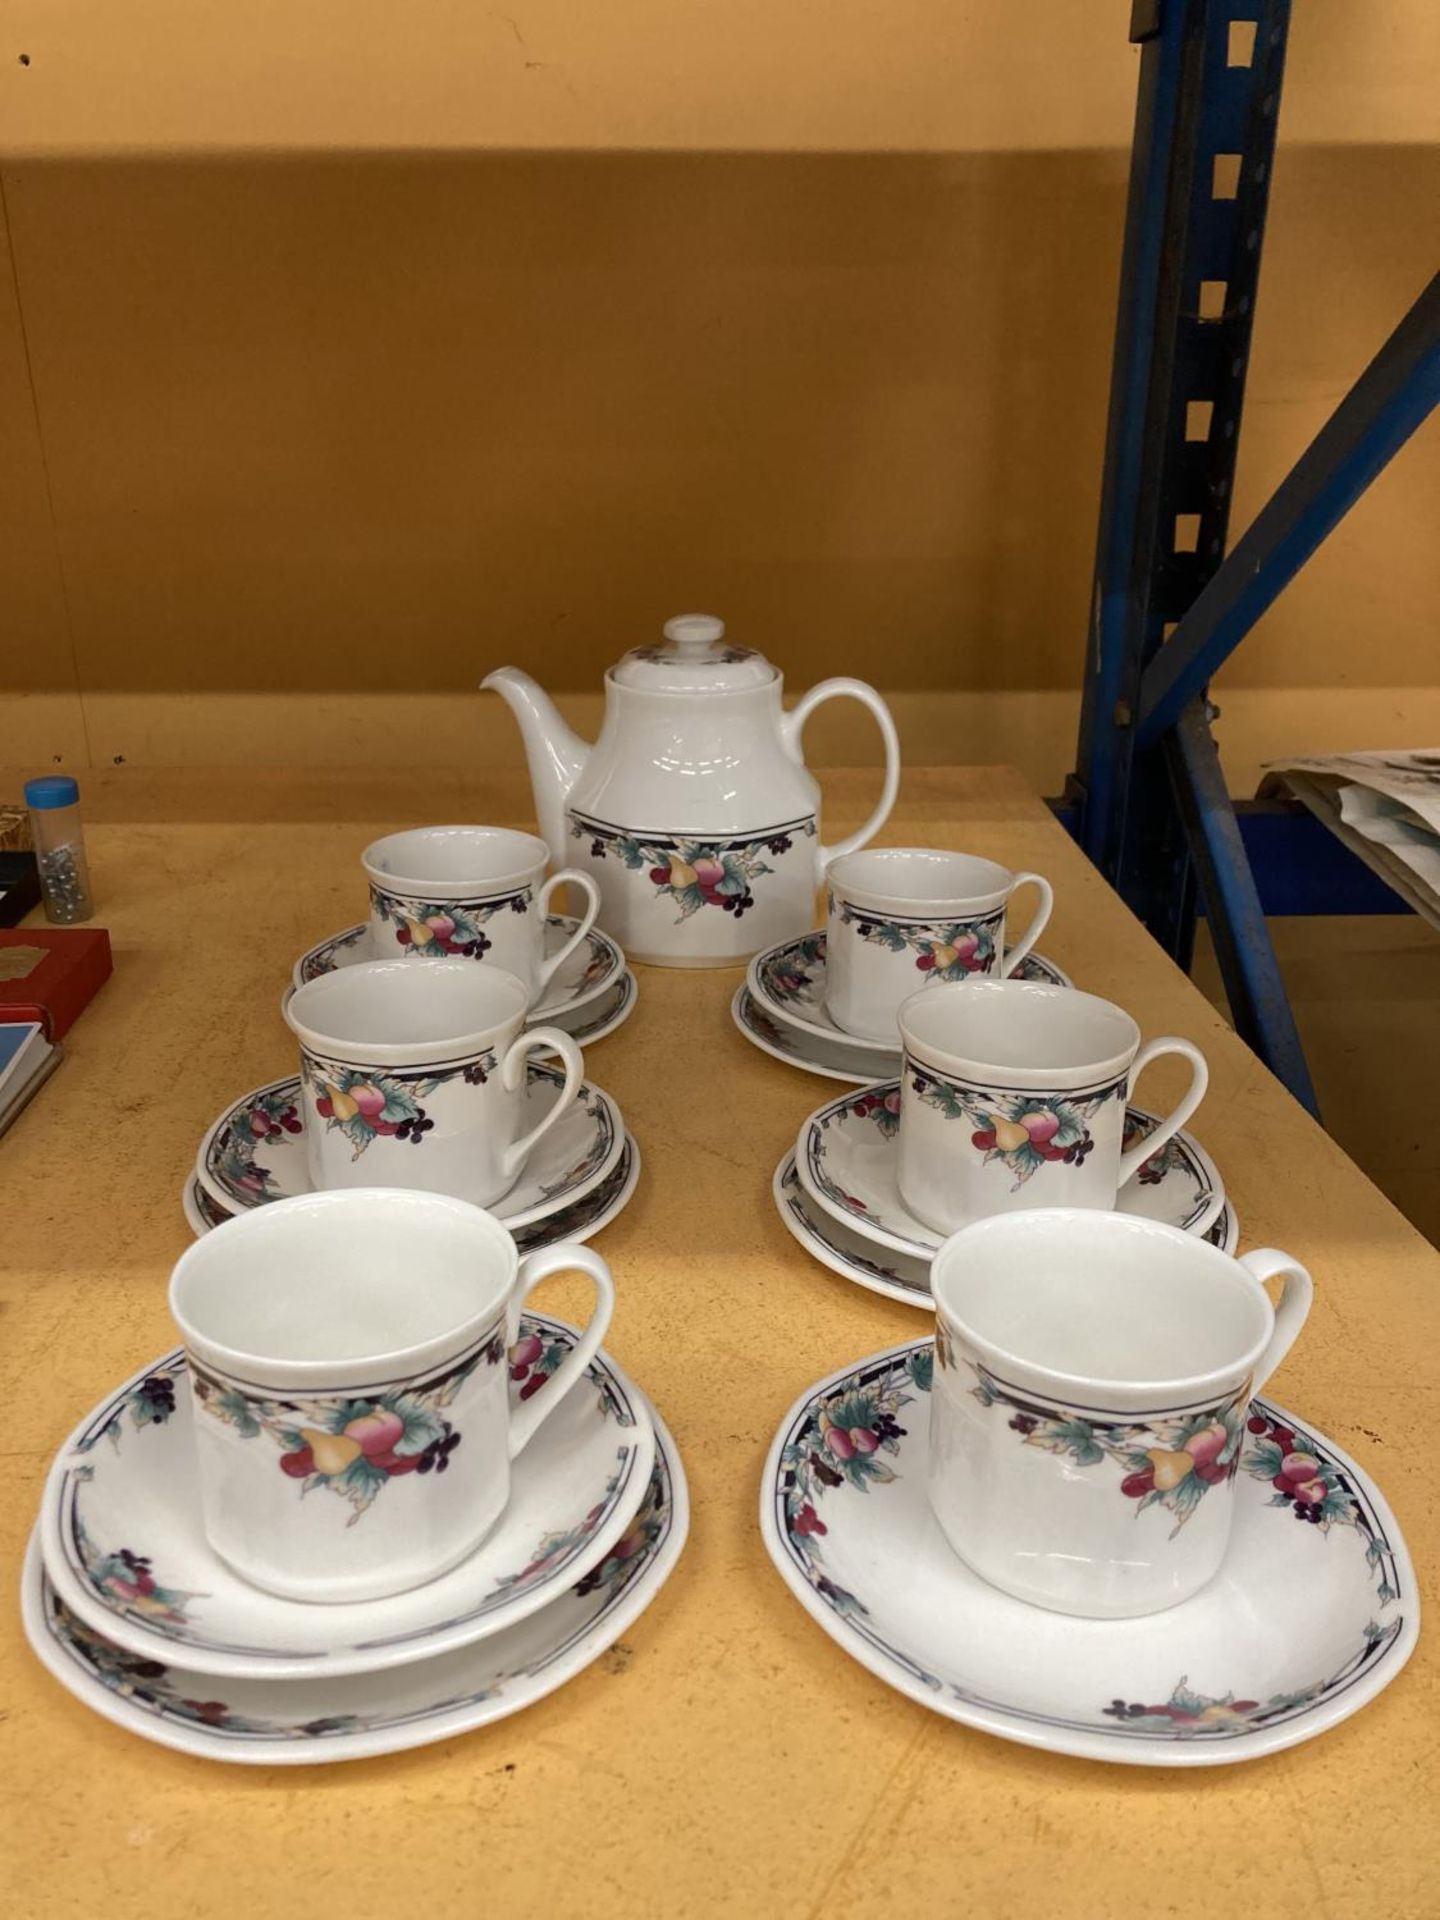 A ROYAL DOULTON 'AUTUMN'S GLORY' PART TEA SET TO INCLUDE TEAPOT, CUPS SAUCERS AND SIDE PLATES